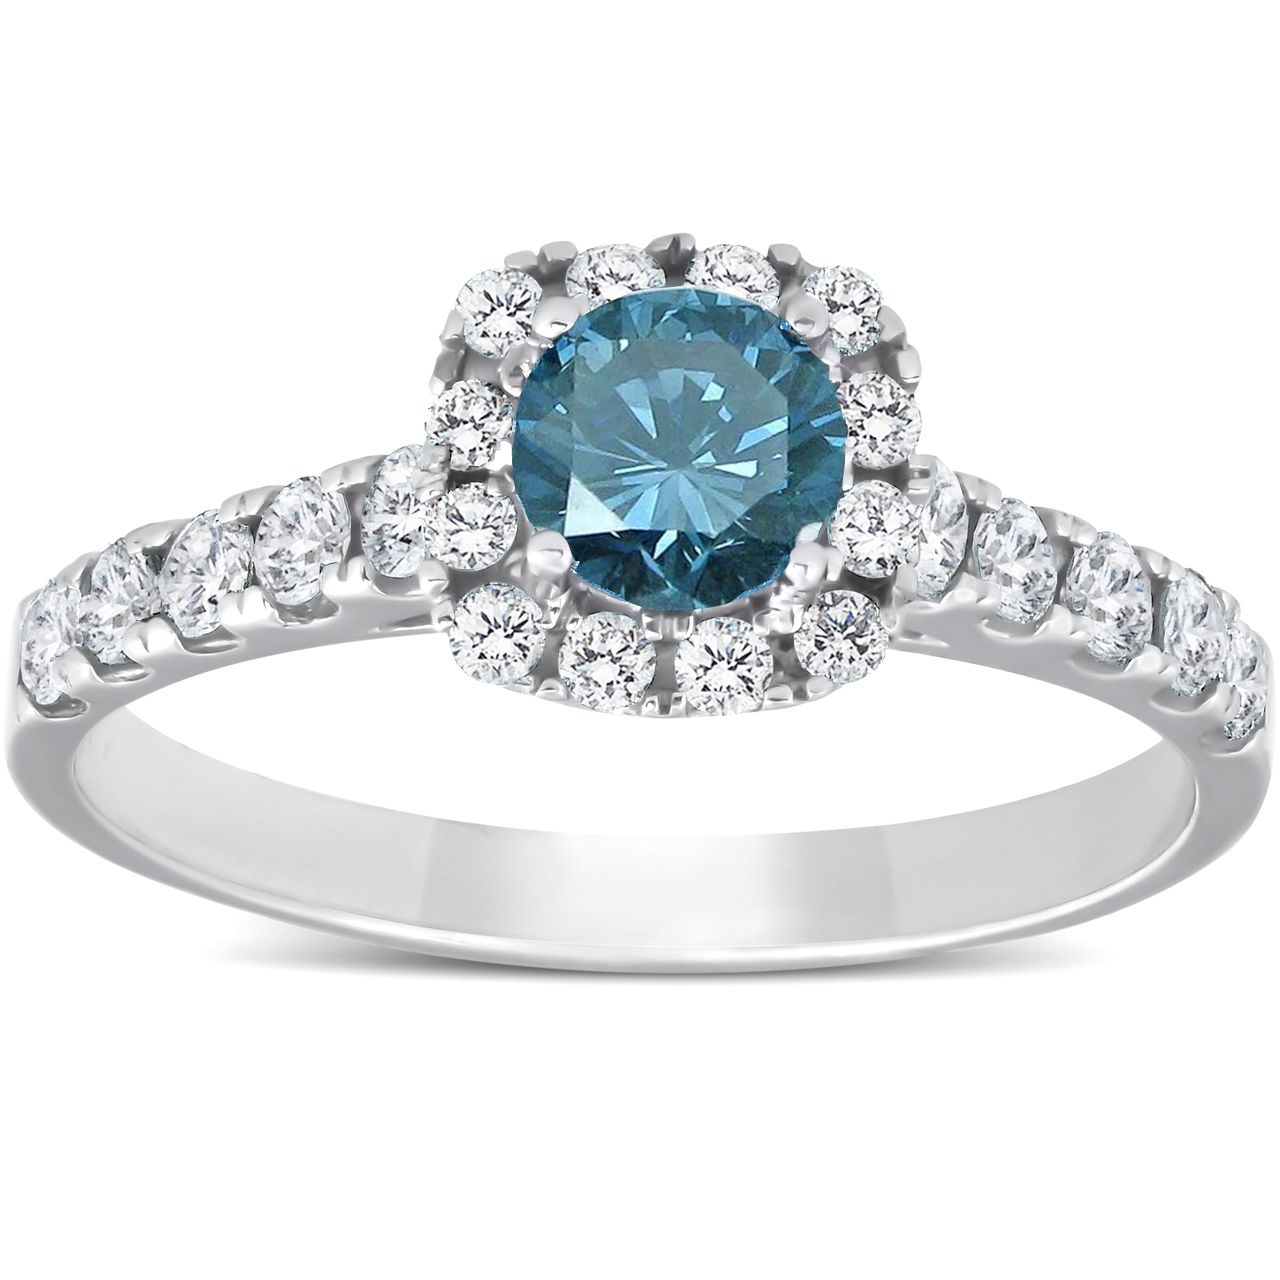 Details About 1 Ct Blue Diamond Cushion Halo Engagement Ring 14k White Gold In Most Popular Enhanced Blue Diamond Vintage Style Anniversary Bands In White Gold (View 7 of 25)